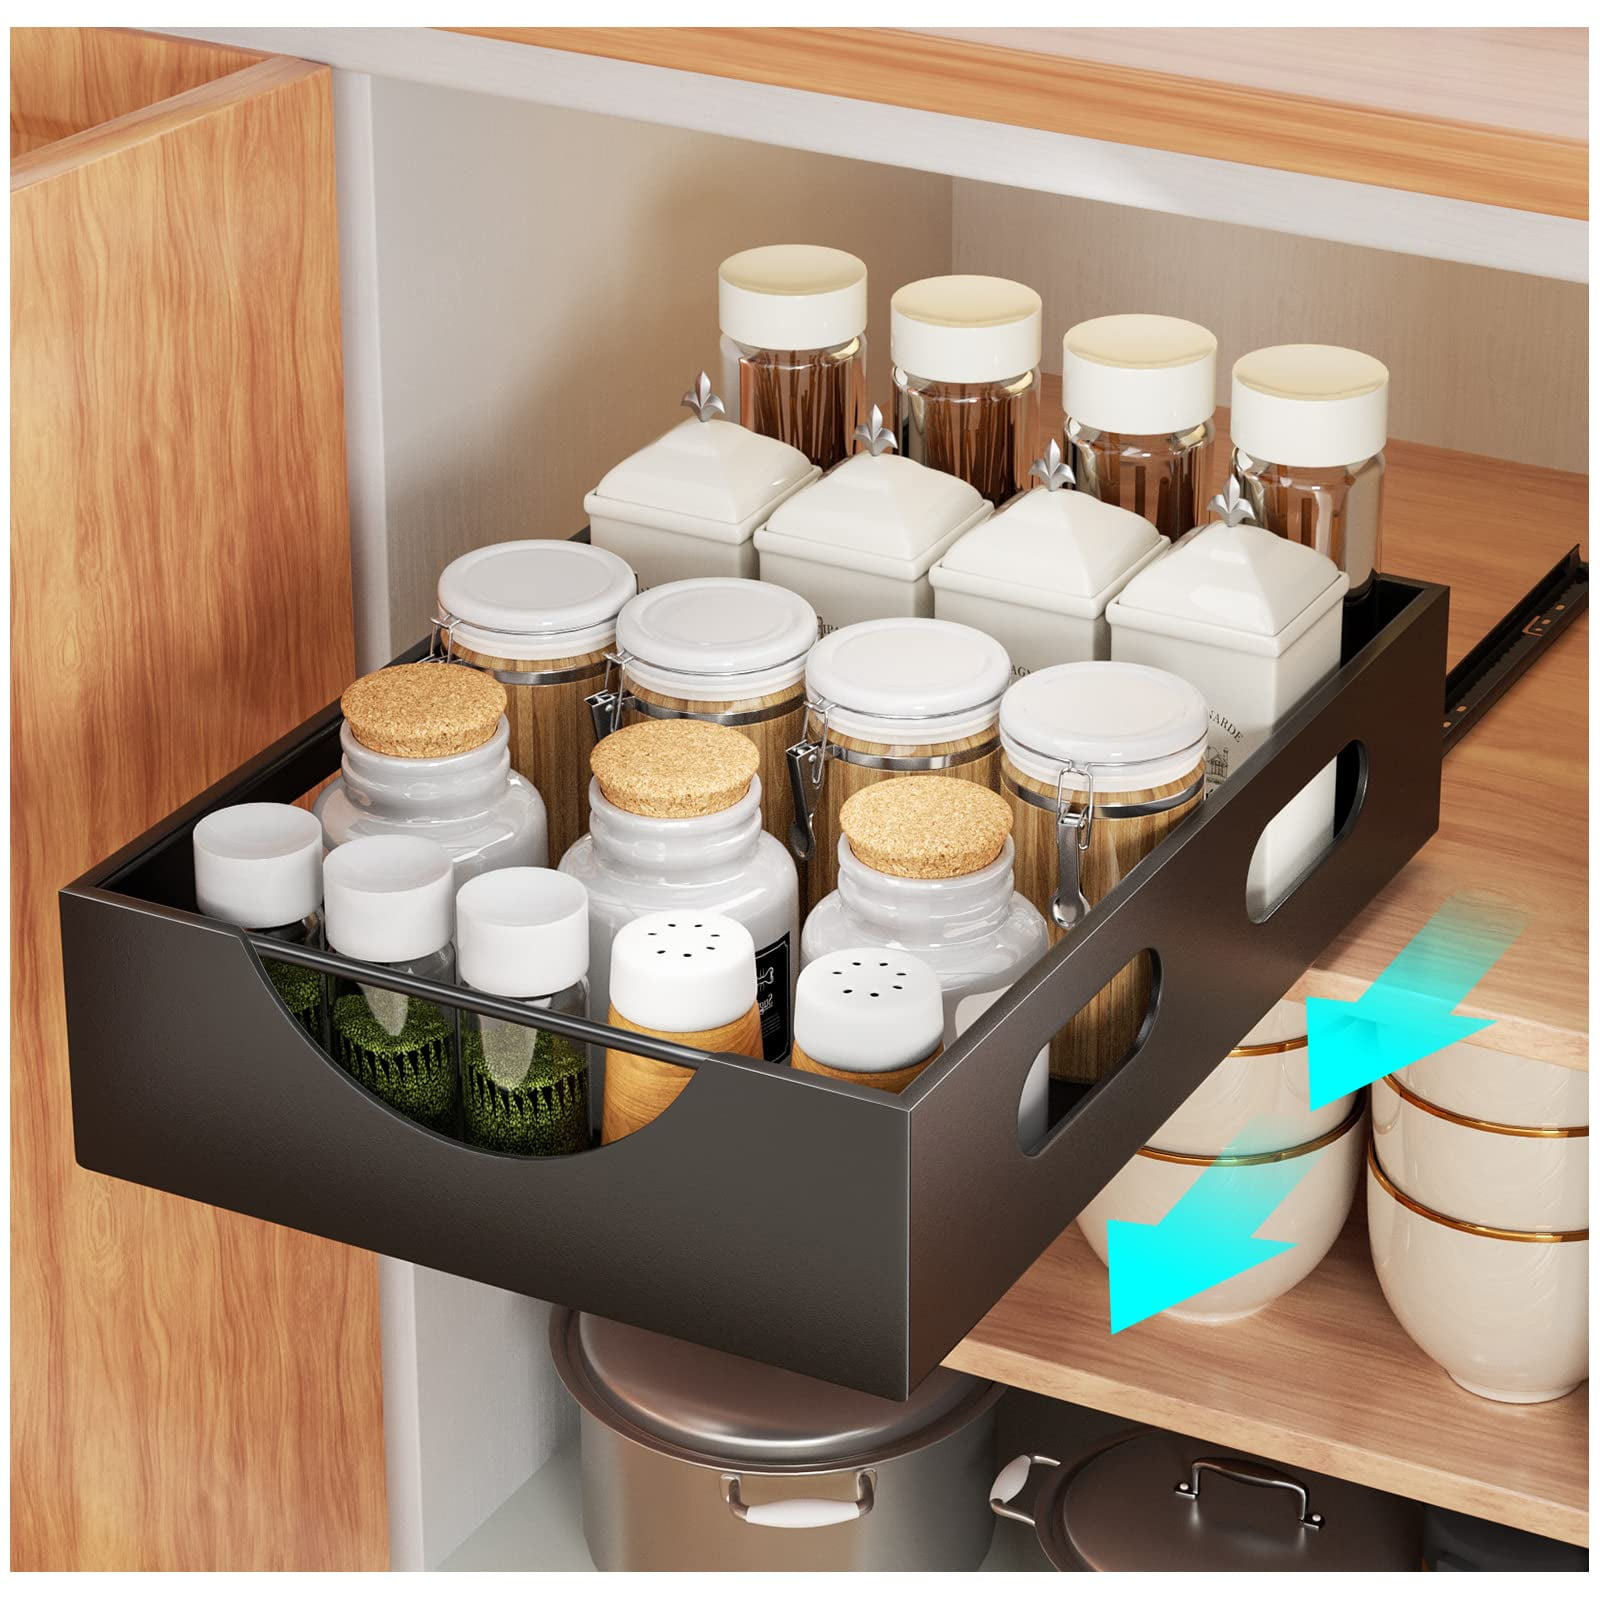 Bargain Bonanza Pull Out Cabinet Organizer Fixed With Adhesive